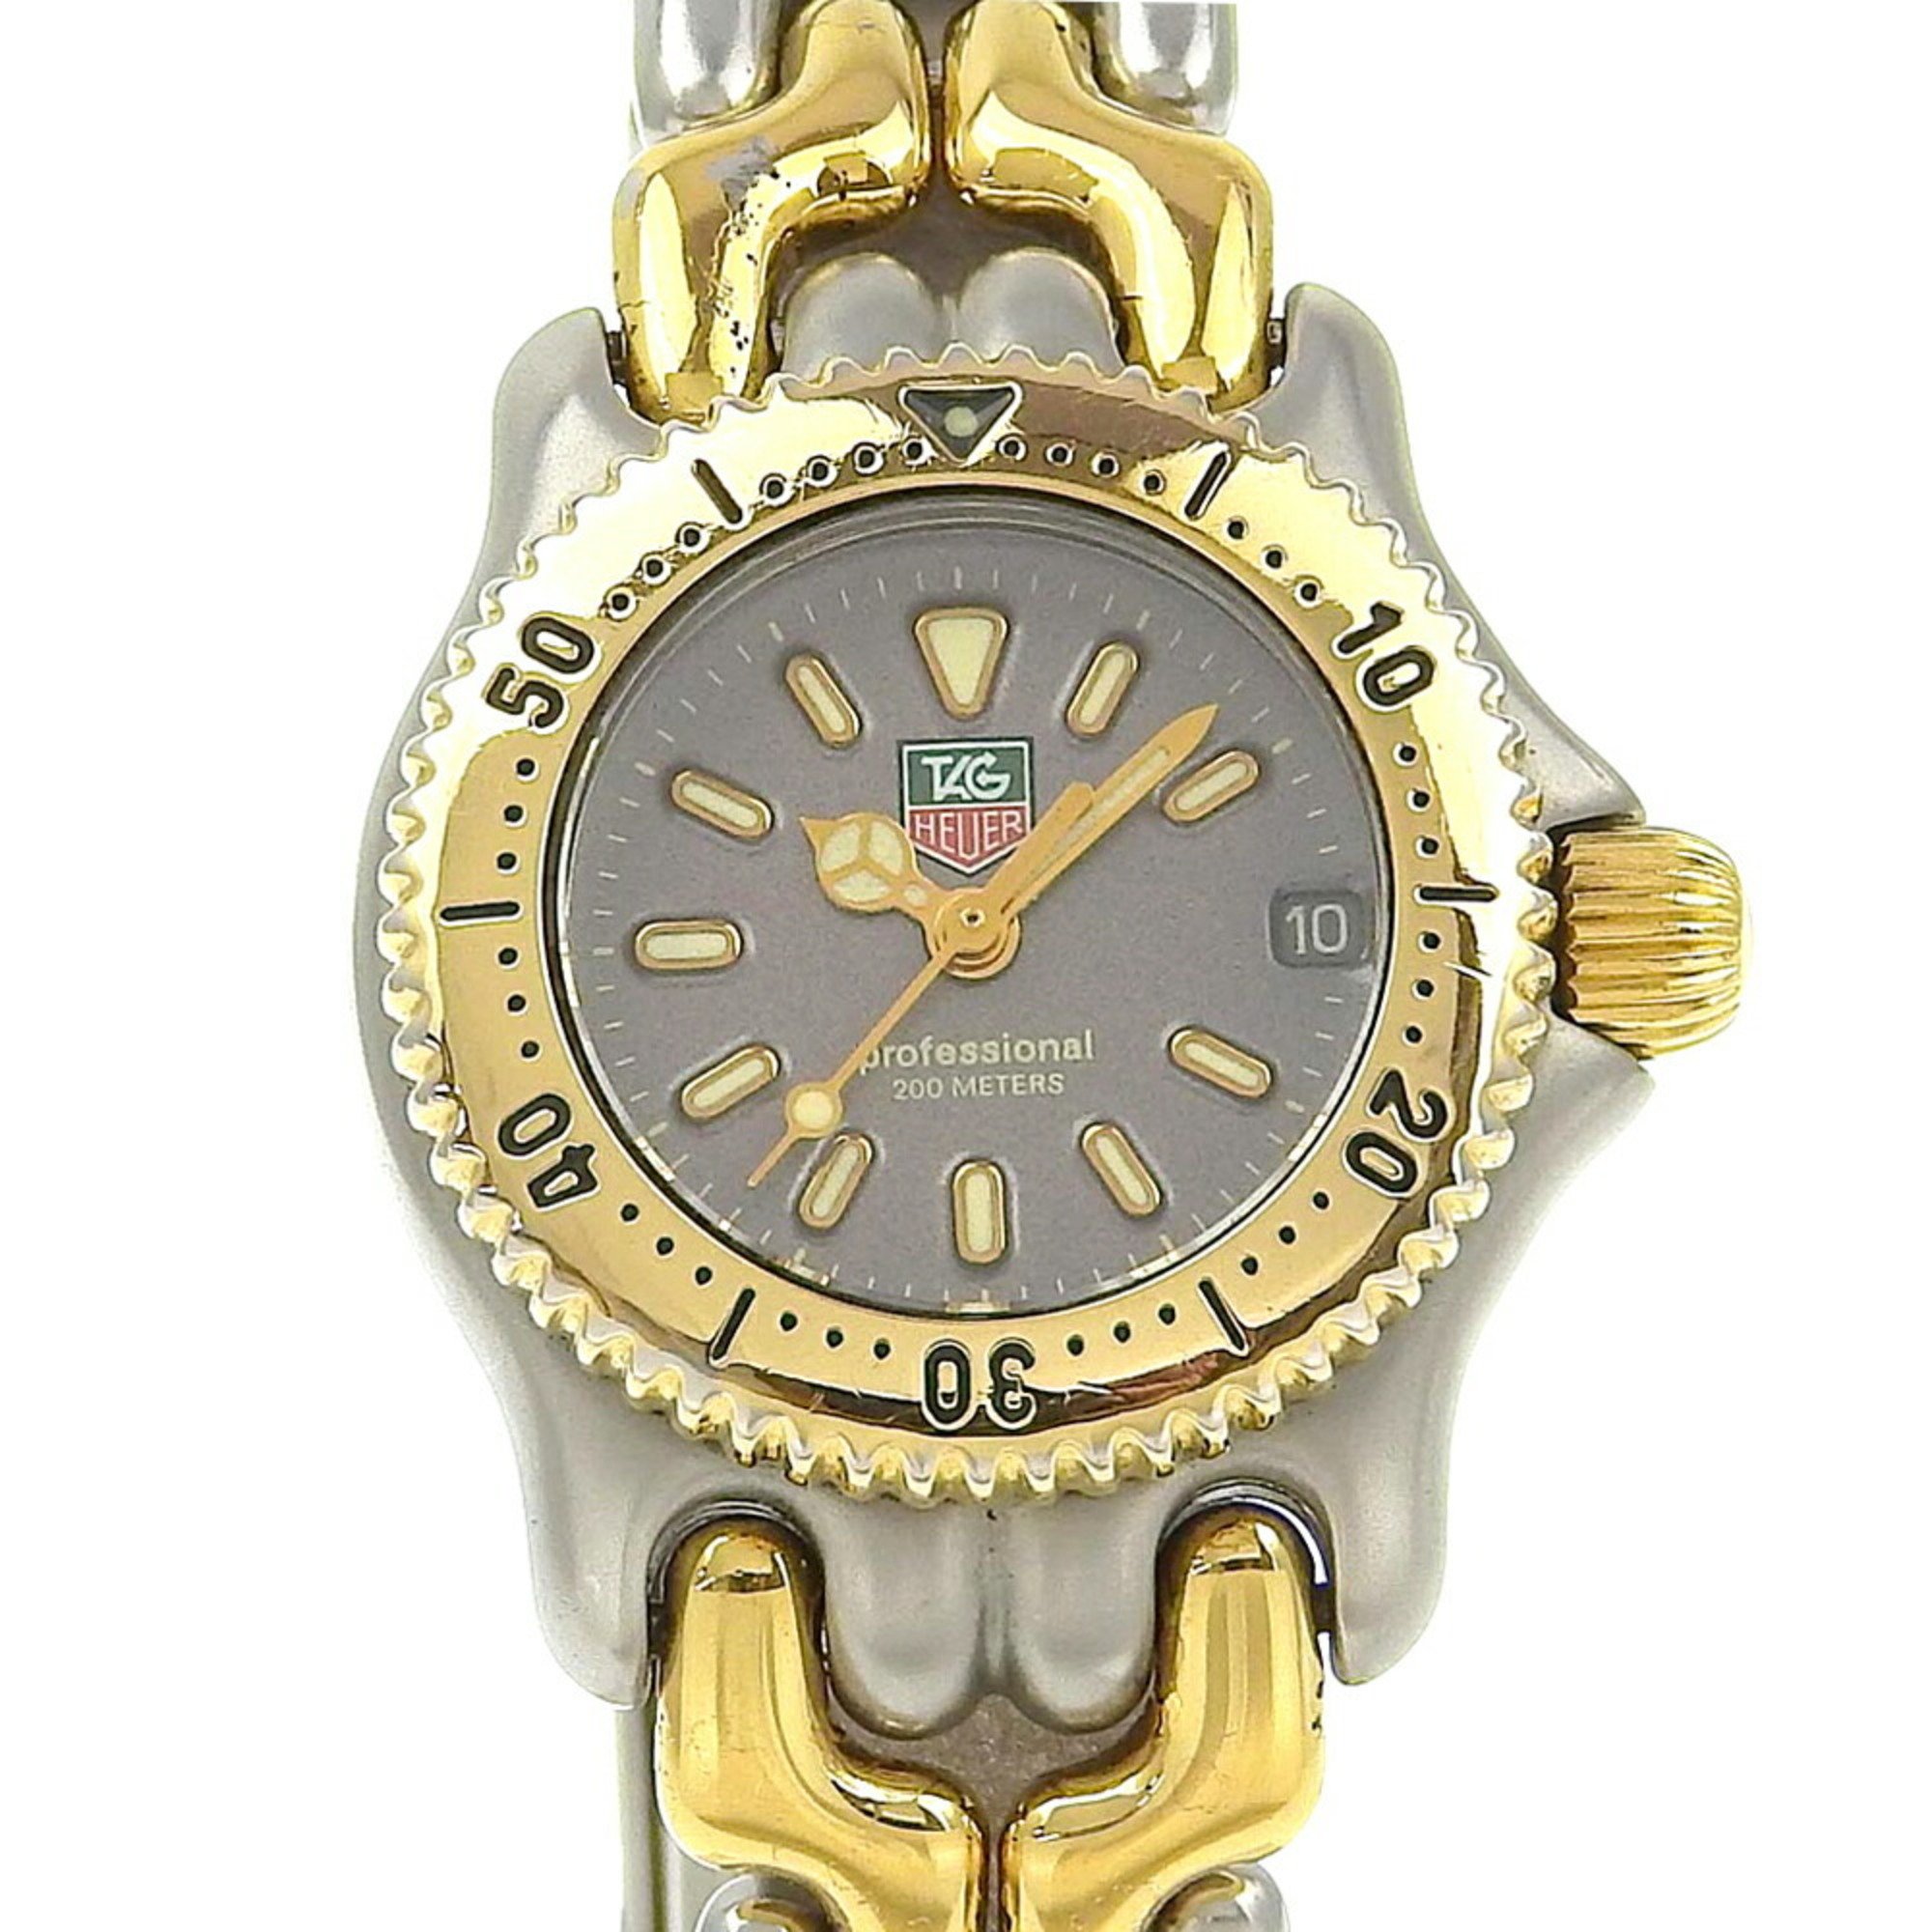 TAG HEUER Professional Watch, Two-tone, S95-208, Stainless Steel, Quartz, Analog Display, Grey Dial, Professional, Women's